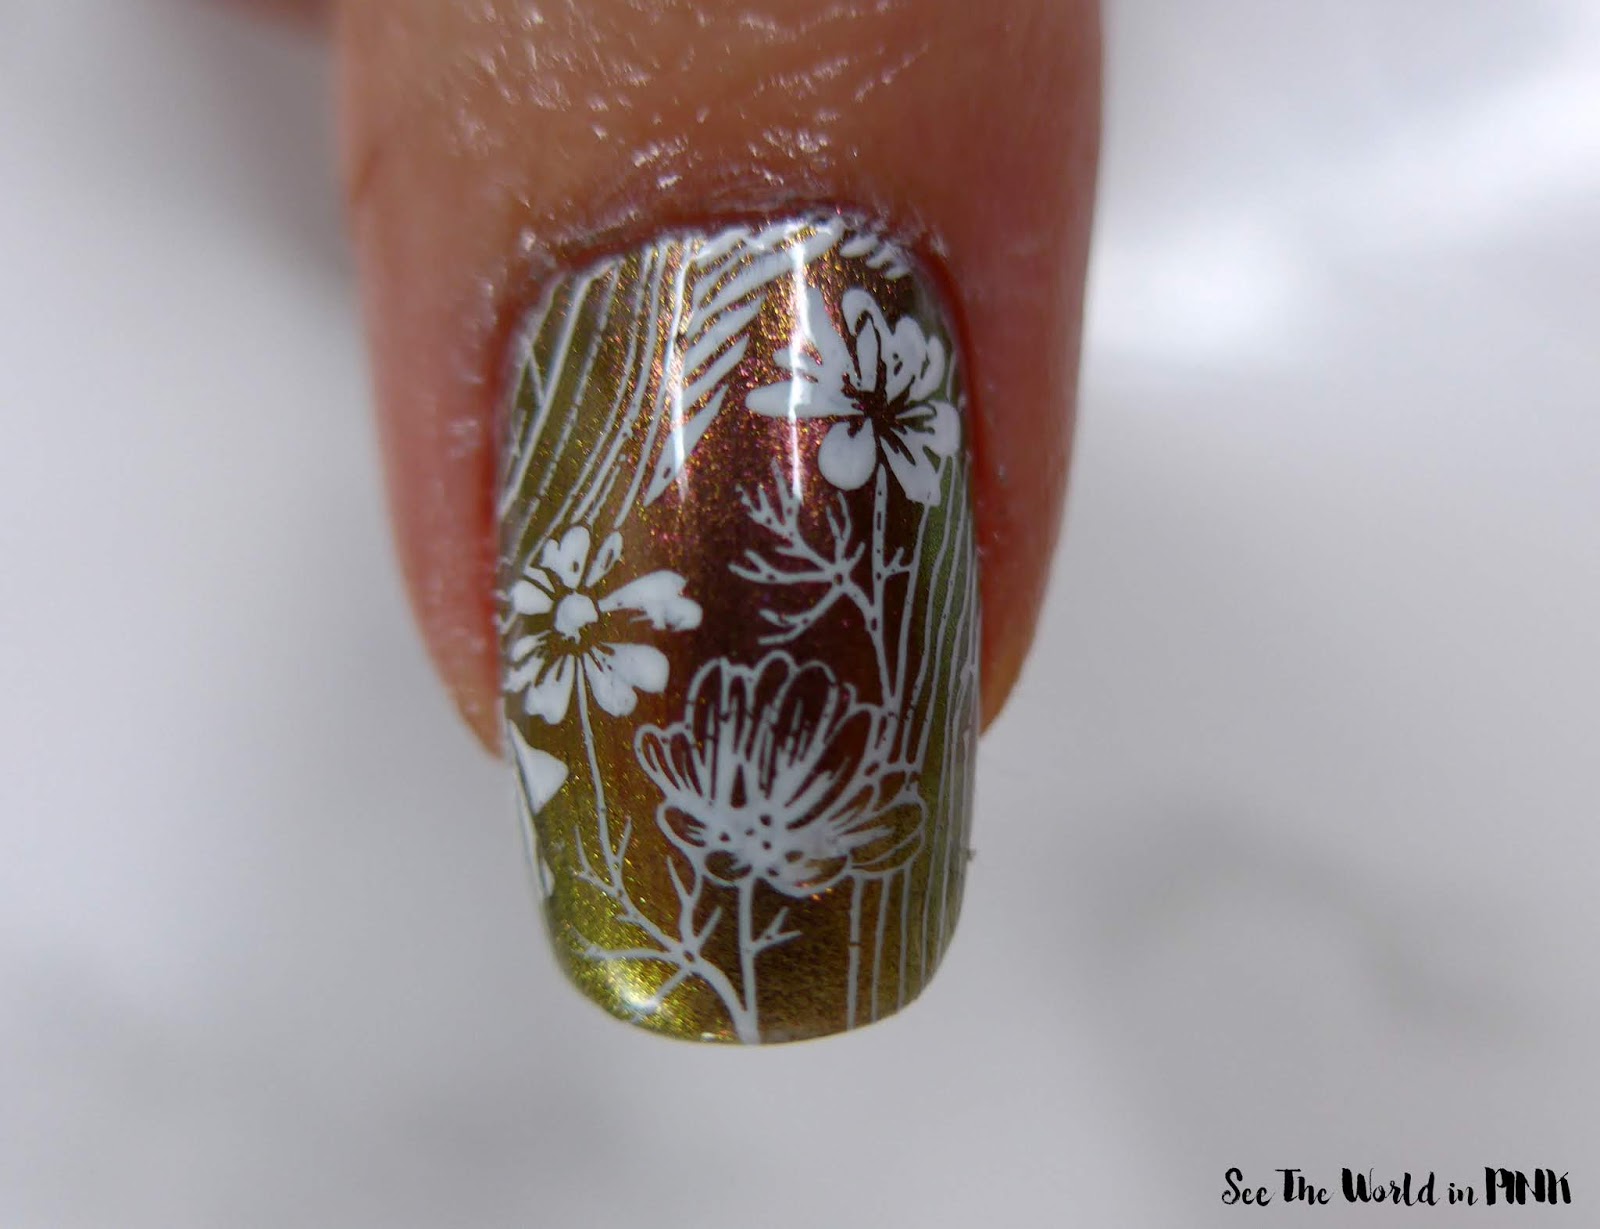 Manicure Monday - Stamped White Floral Nails